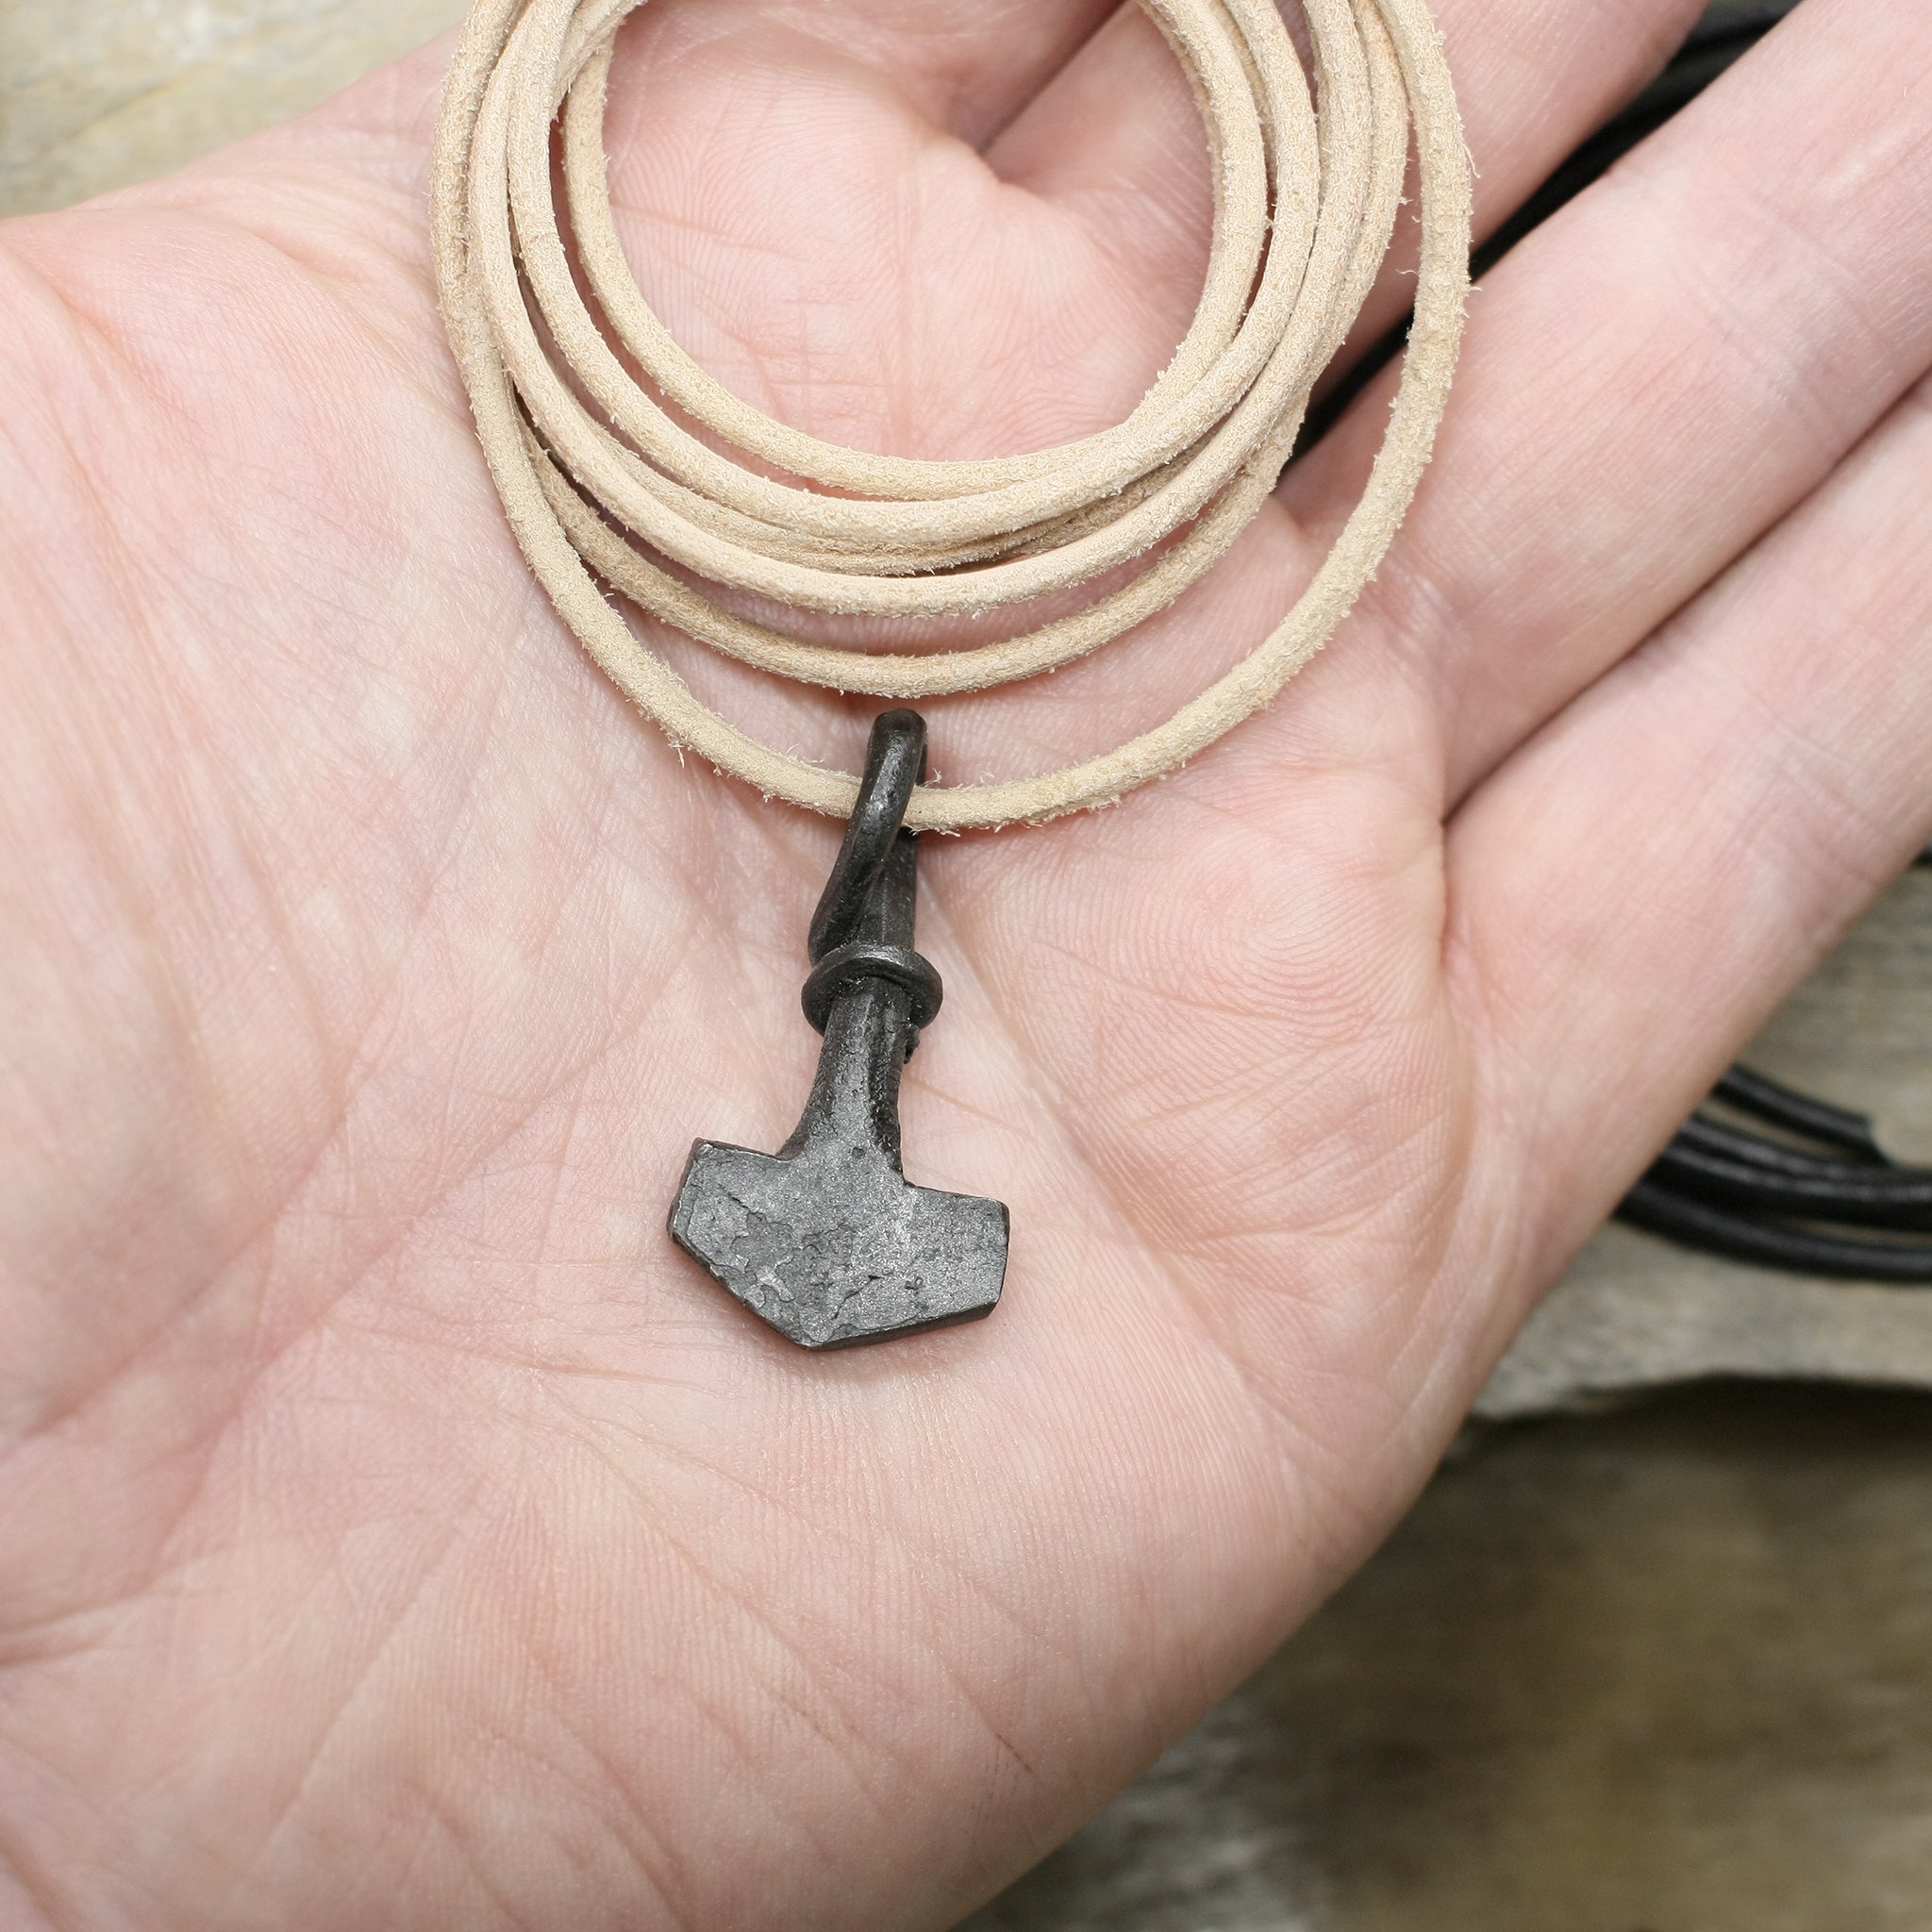 Small Iron Thors Hammer Pendant on Thong on Hand